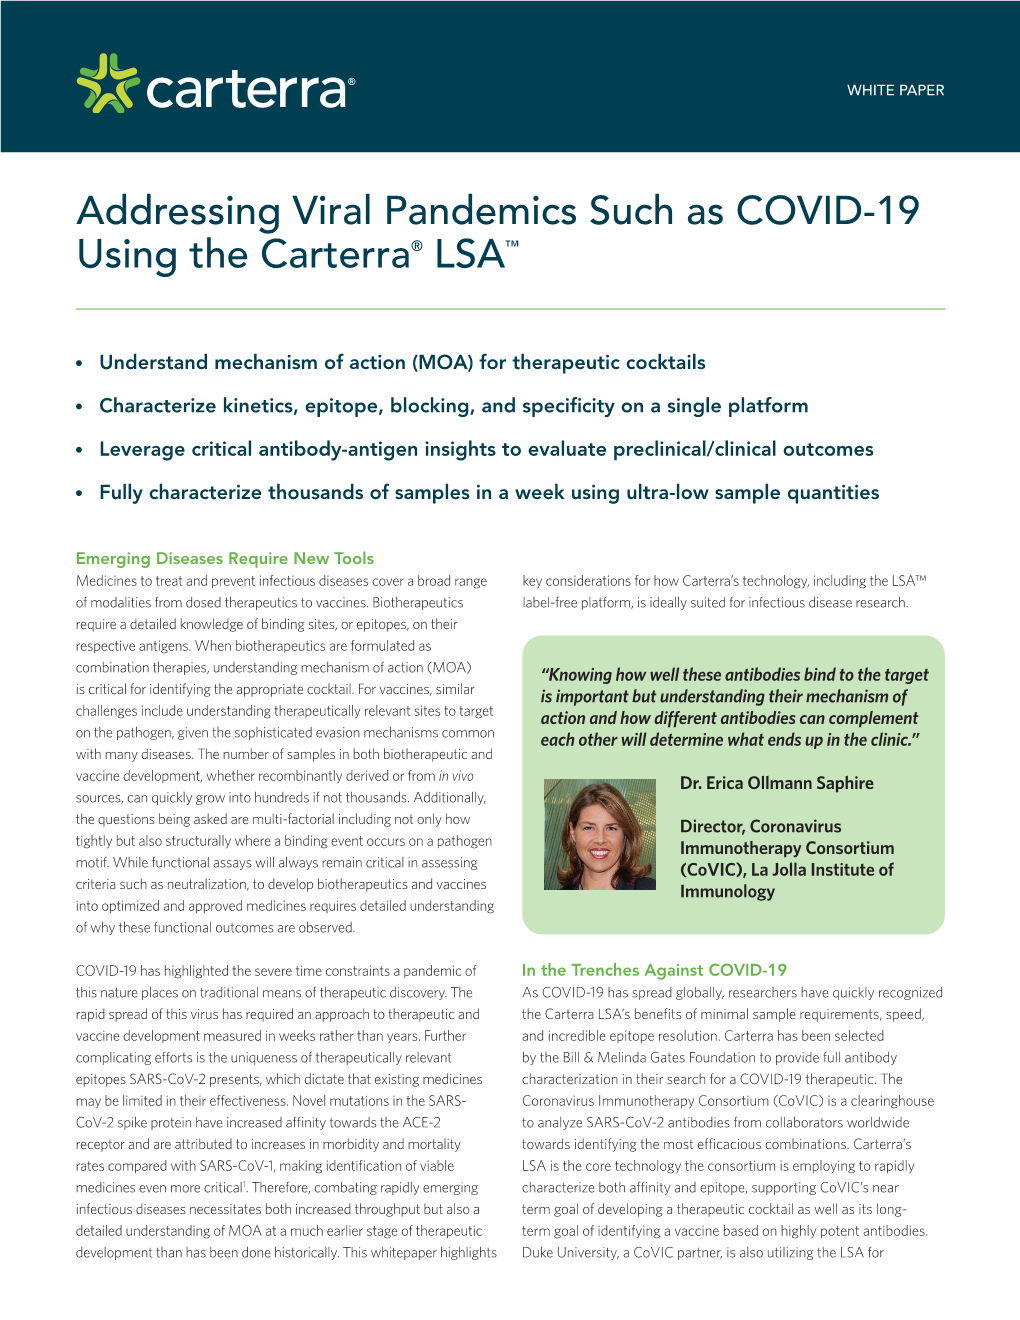 Addressing Viral Pandemics Such As COVID-19 Using the Carterra® LSA™